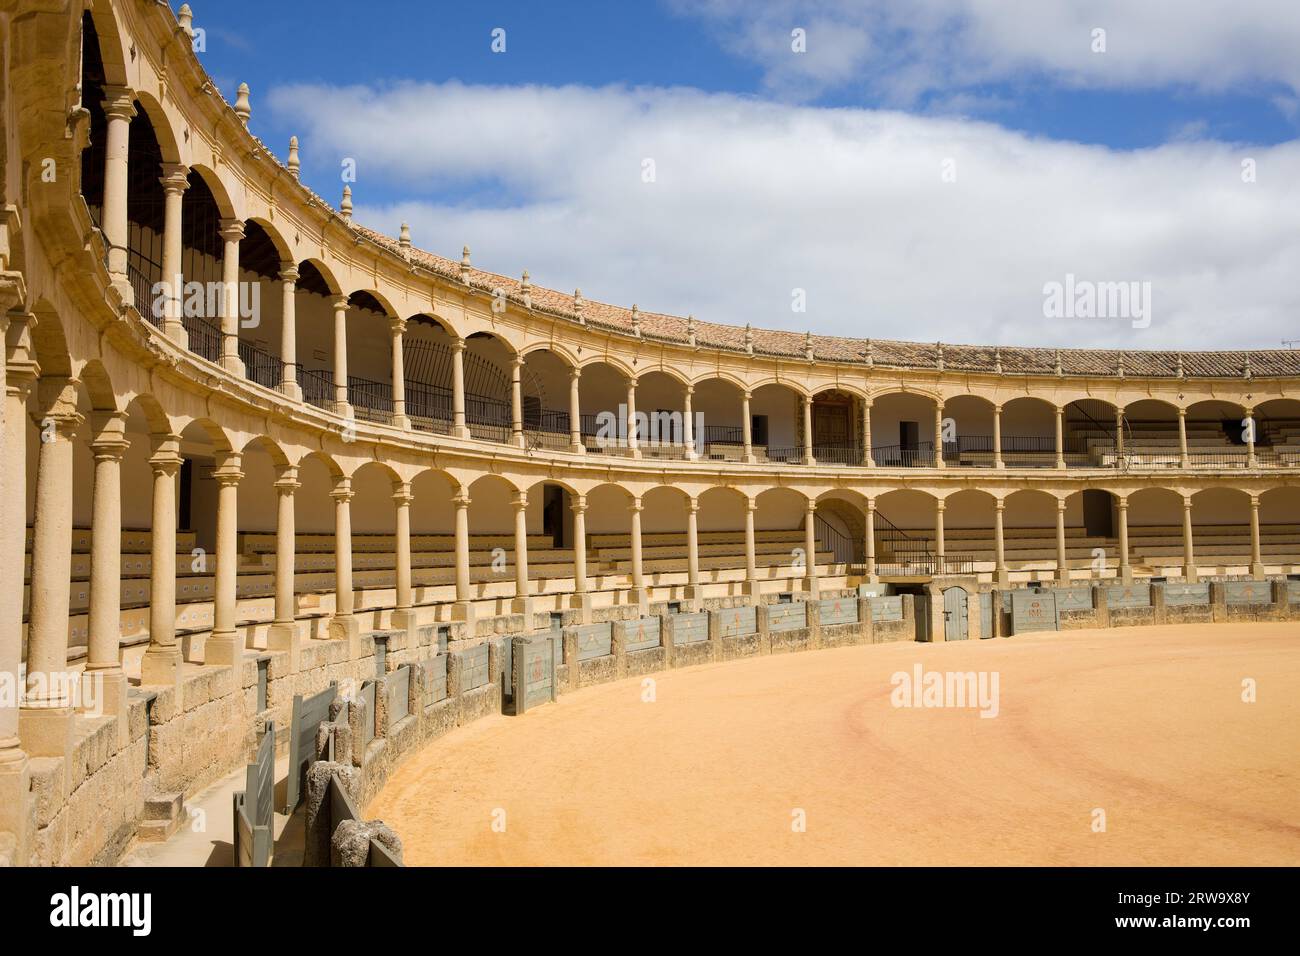 Bullring in Ronda, opened in 1785, one of the oldest and most famous bullfighting arena in Spain Stock Photo